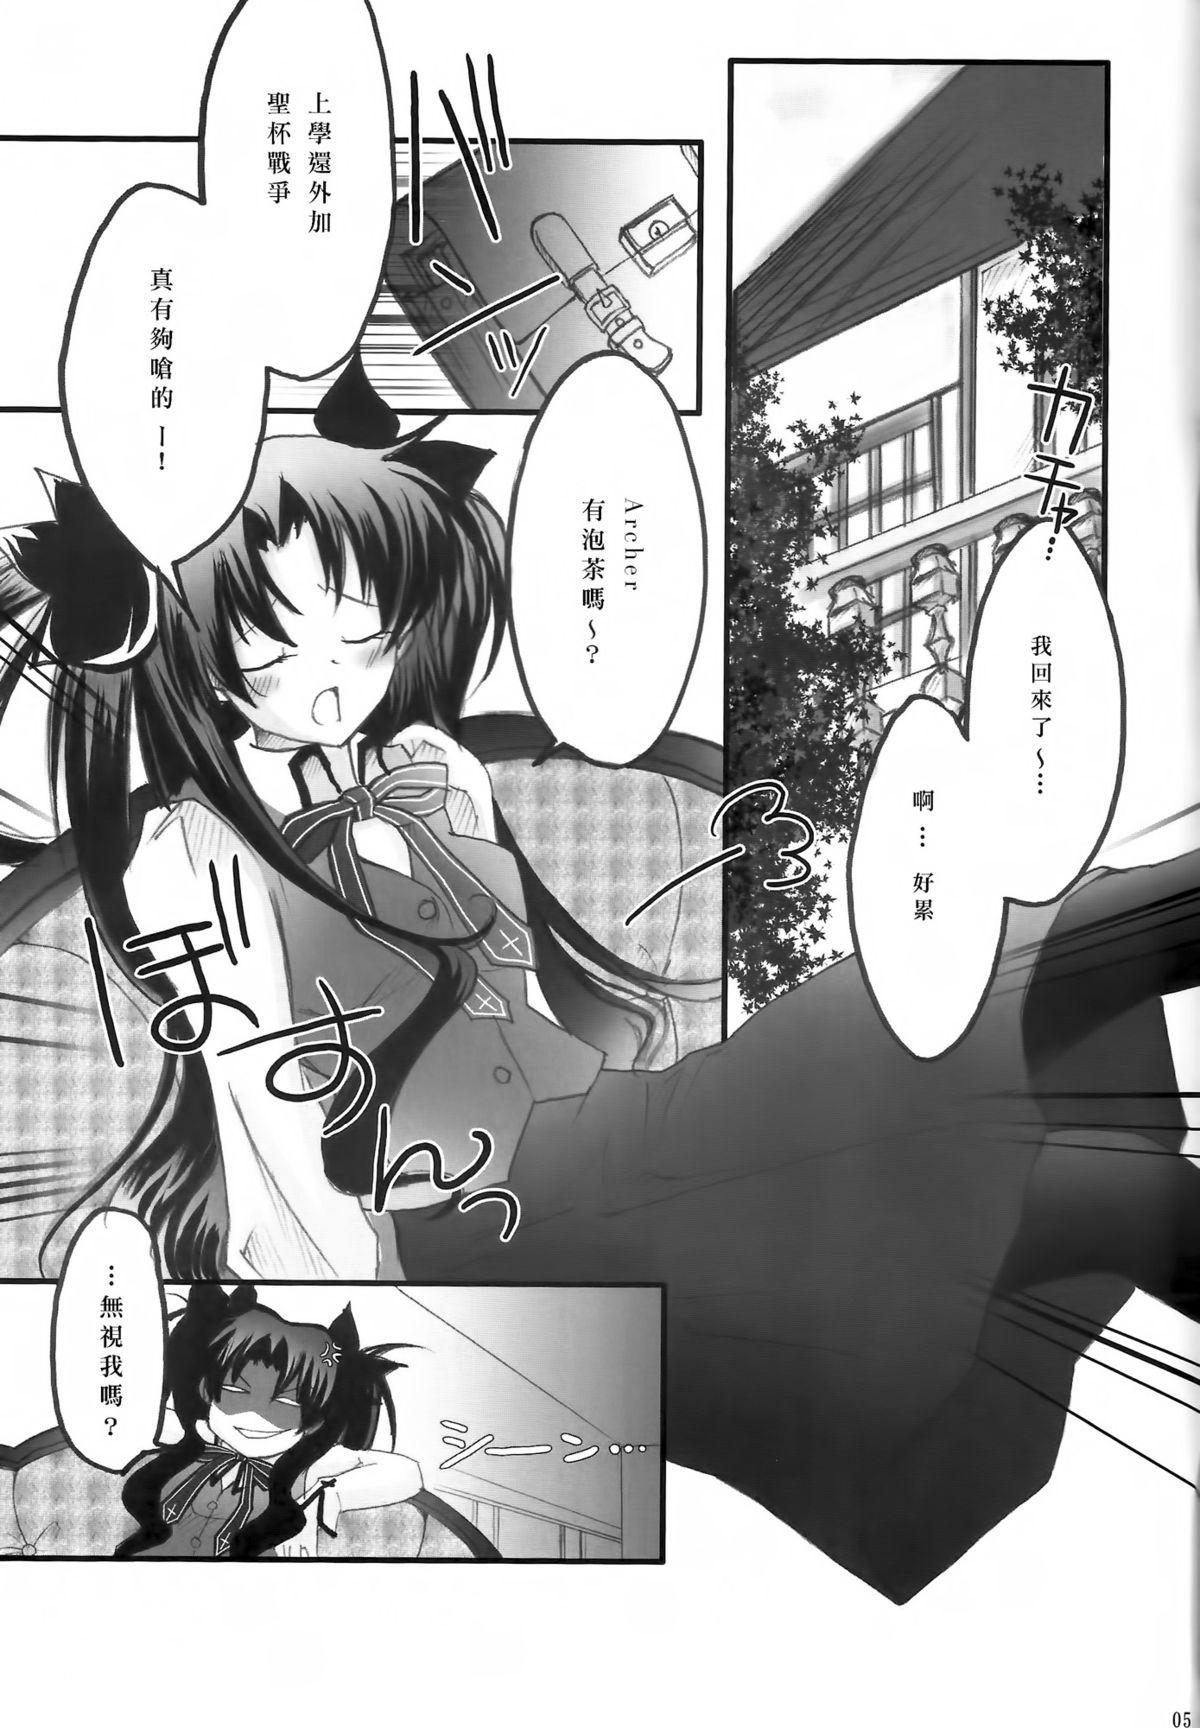 Pissing Himitsu Nikki 1 - Fate stay night Gaypawn - Page 3